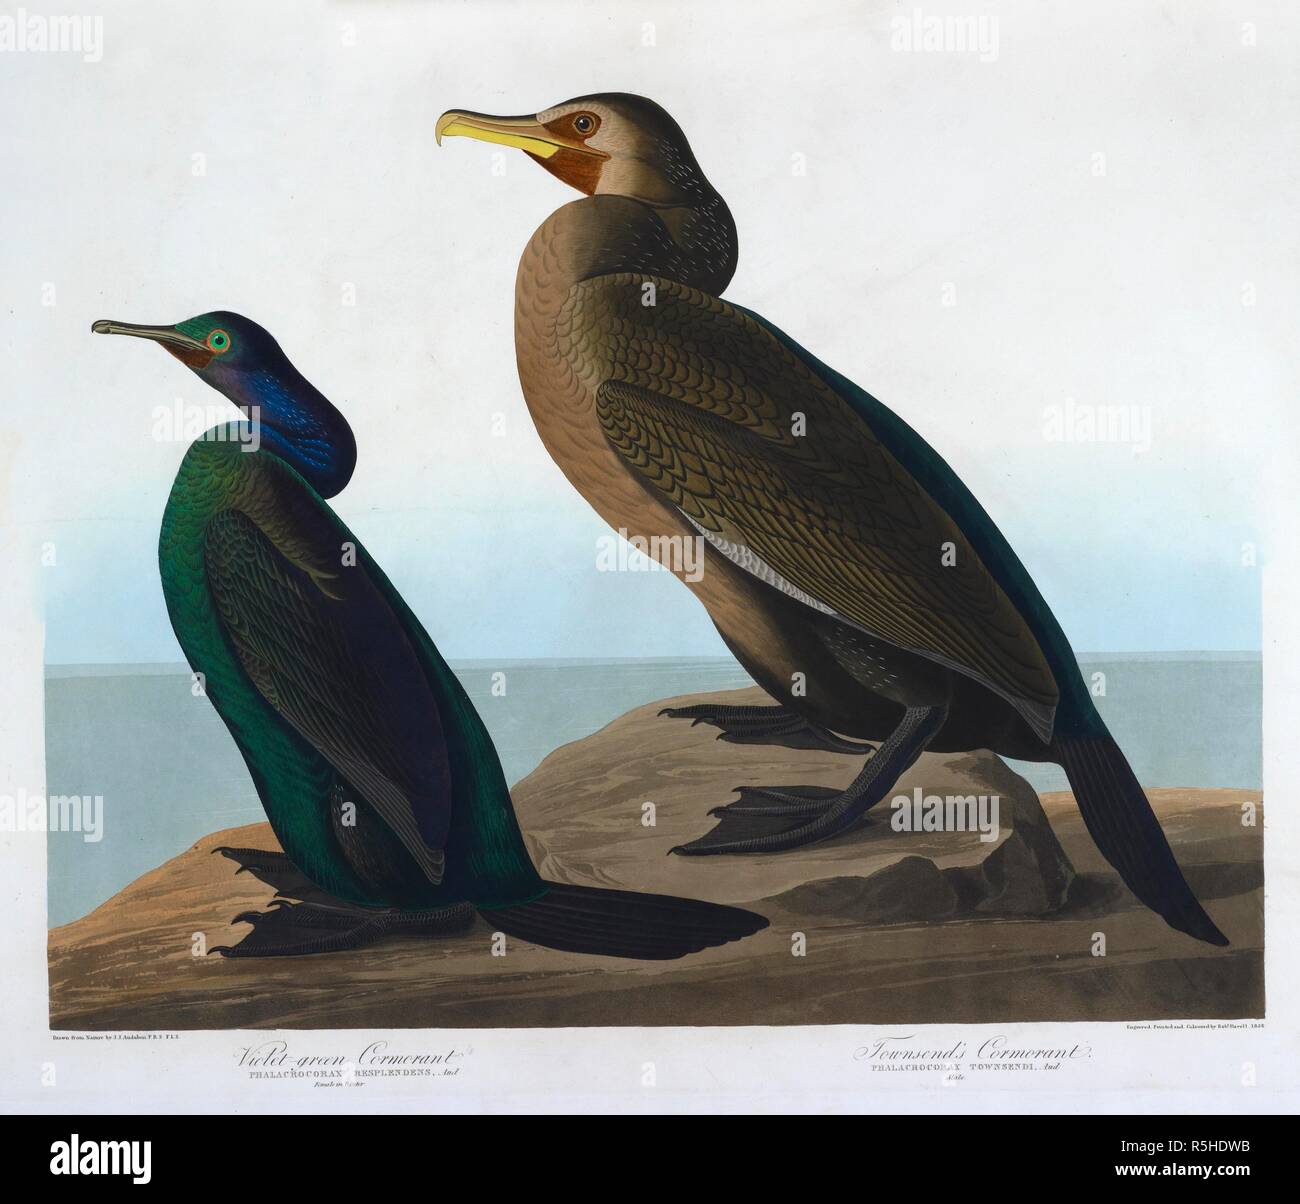 Violet green cormorant. Female in winter. Townsend's cormorant. Male. The Birds of America, from original drawings. London, 1827-38. Two birds. Colour illustration drawn by Audubon. Source: N.L.TAB.2.(4). plate 412. Language: English. Stock Photo